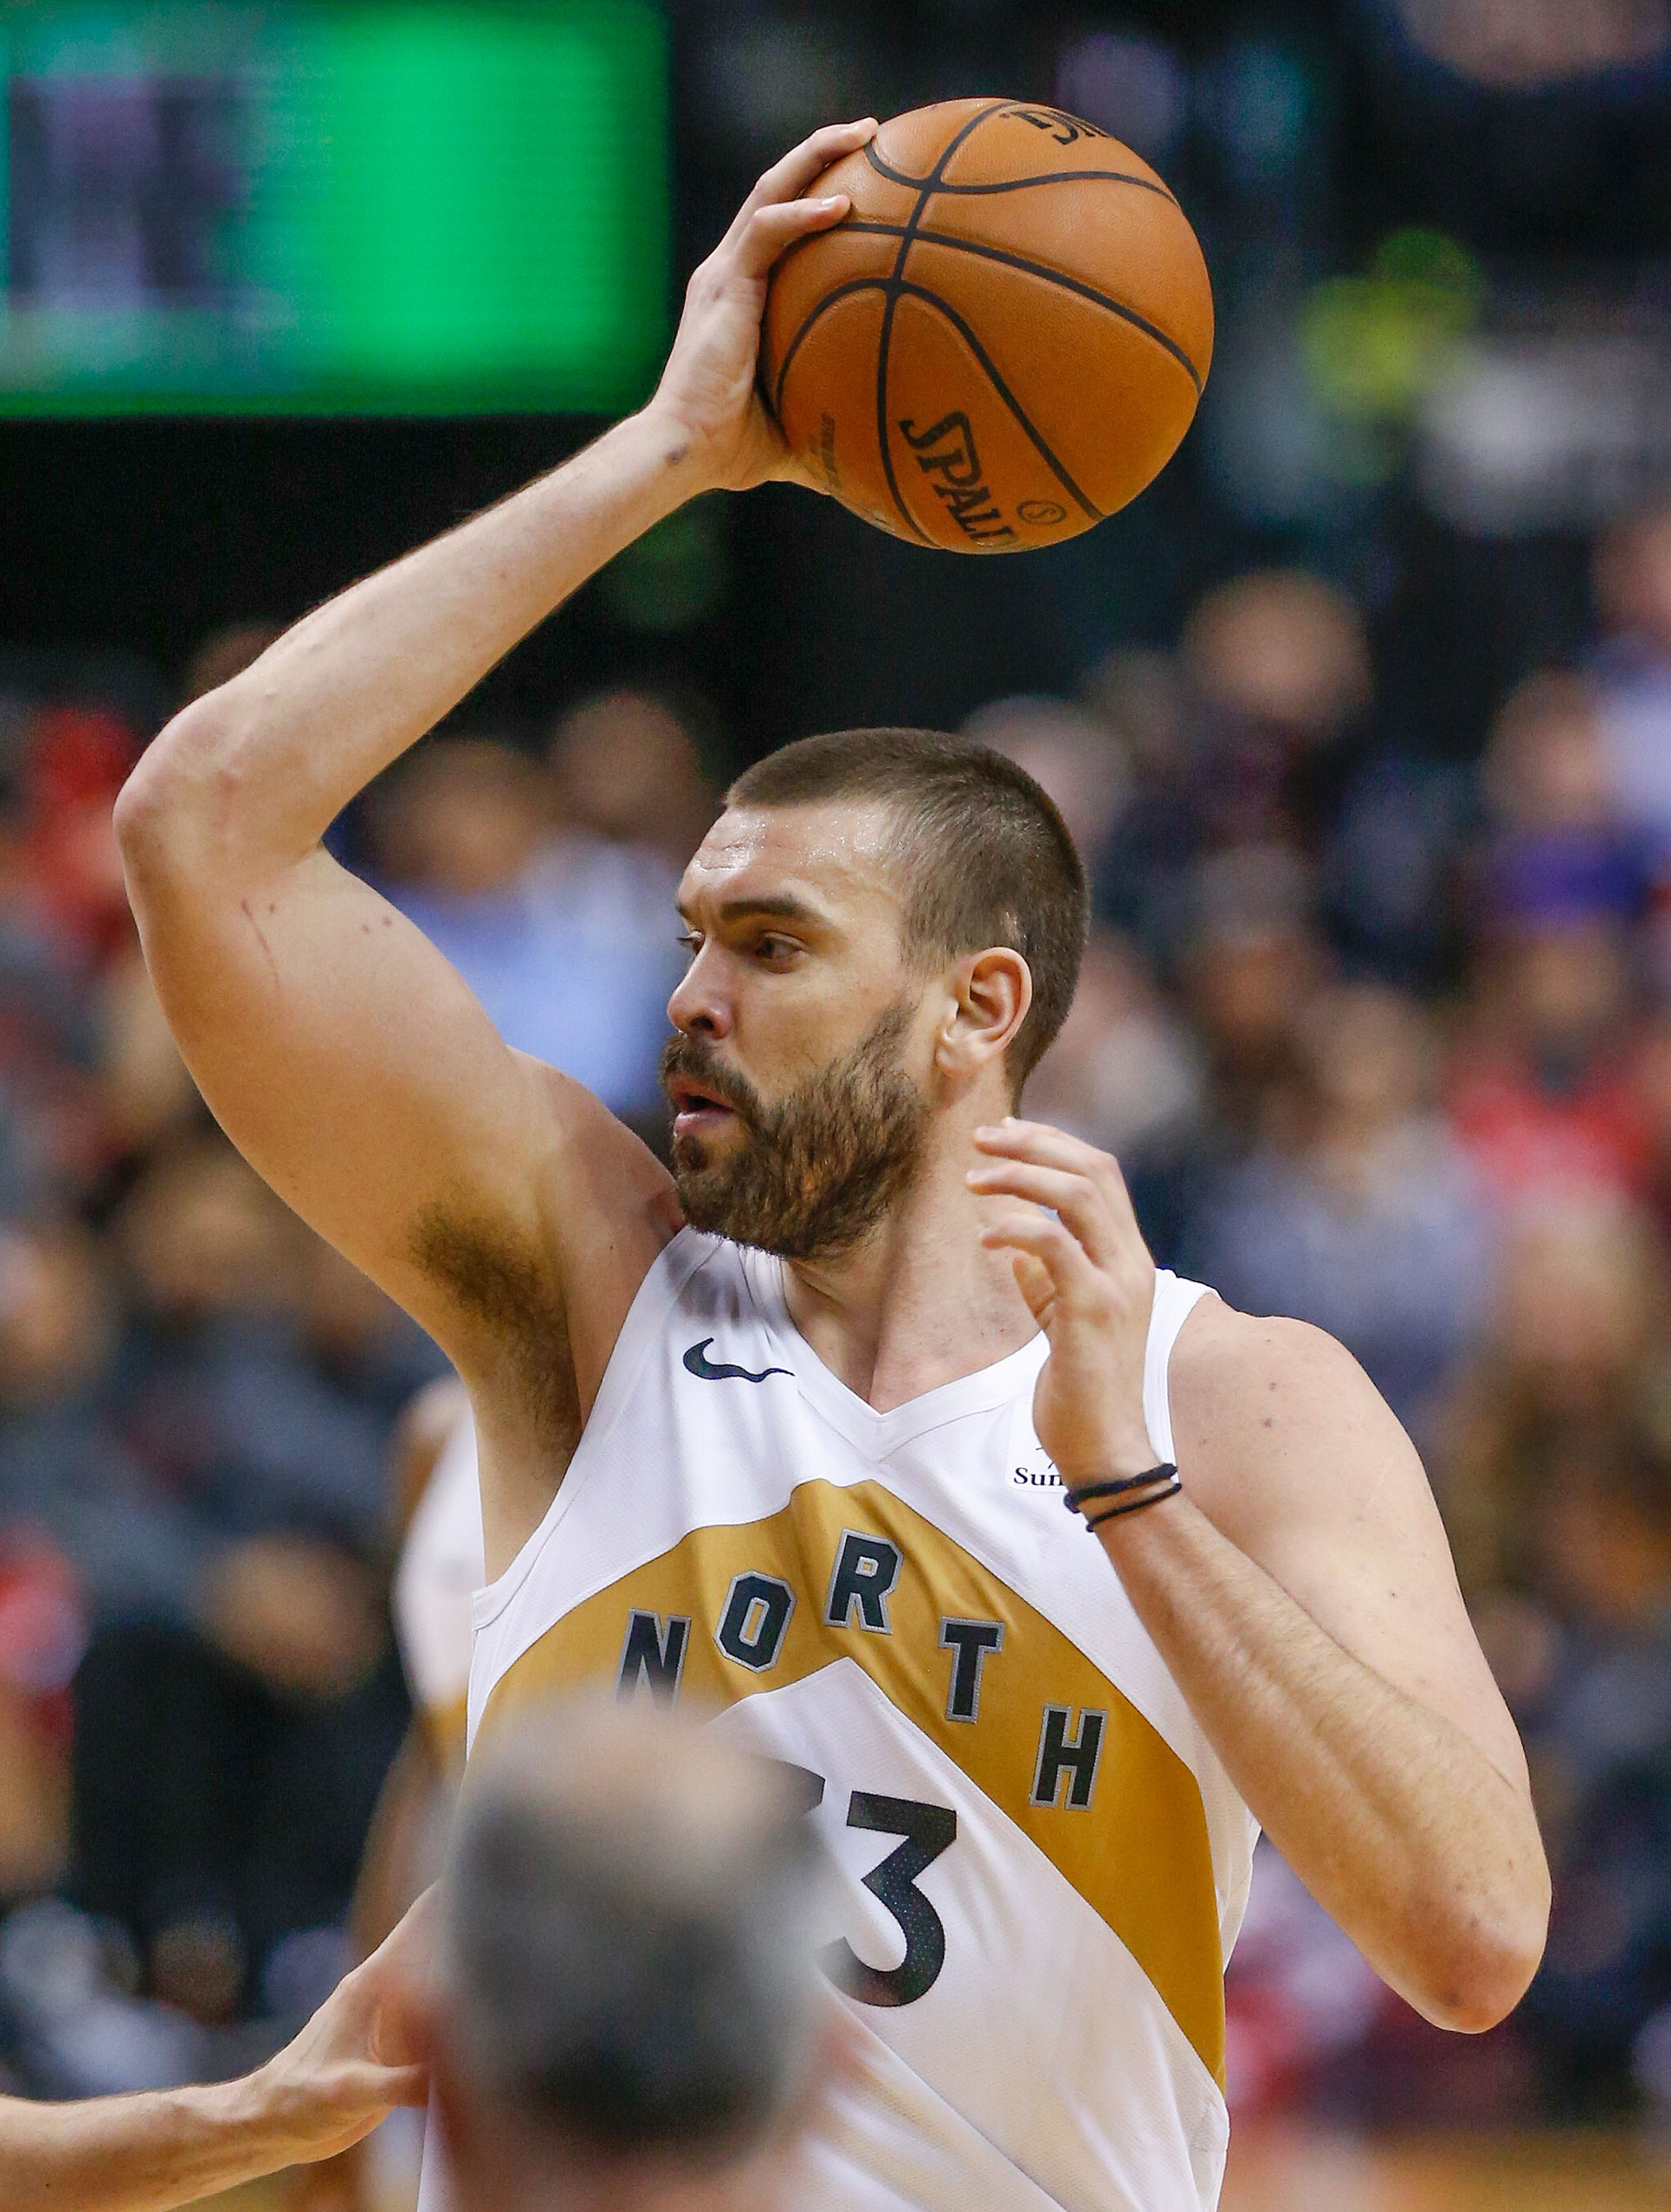 Toronto Raptors center Marc Gasol (33) grasps the ball and looks to pass.